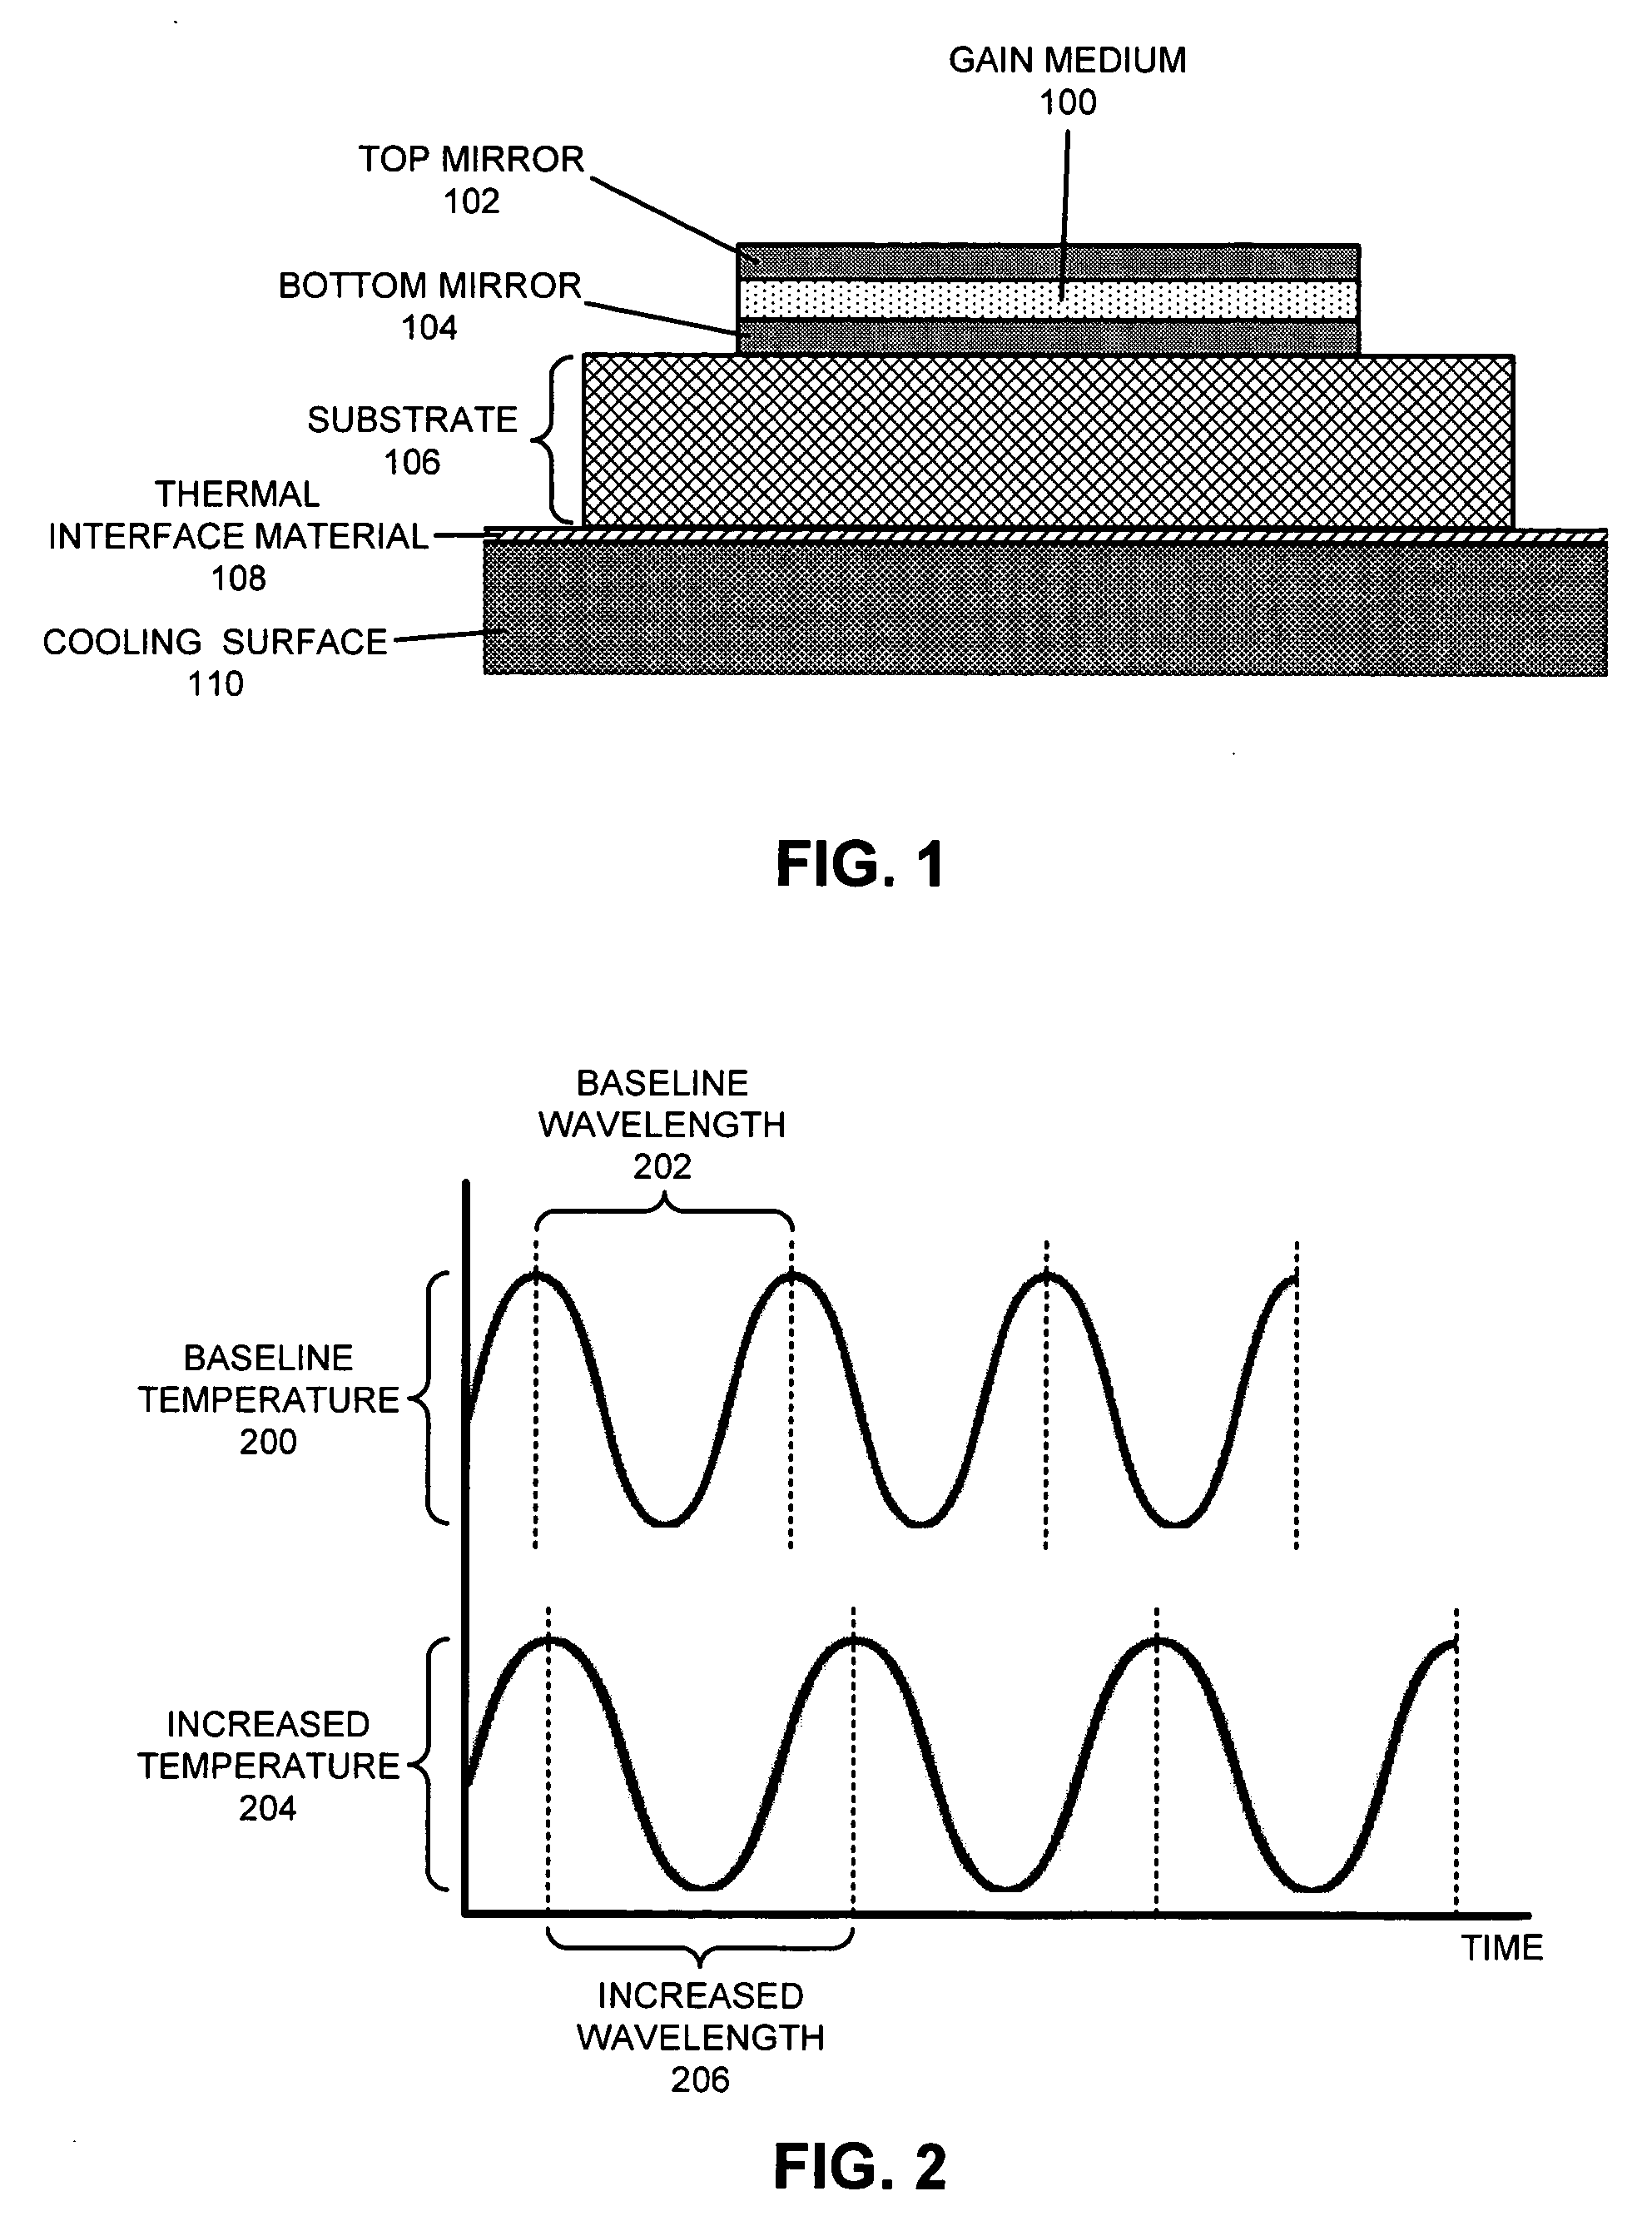 Structures and methods for adjusting the wavelengths of lasers via temperature control